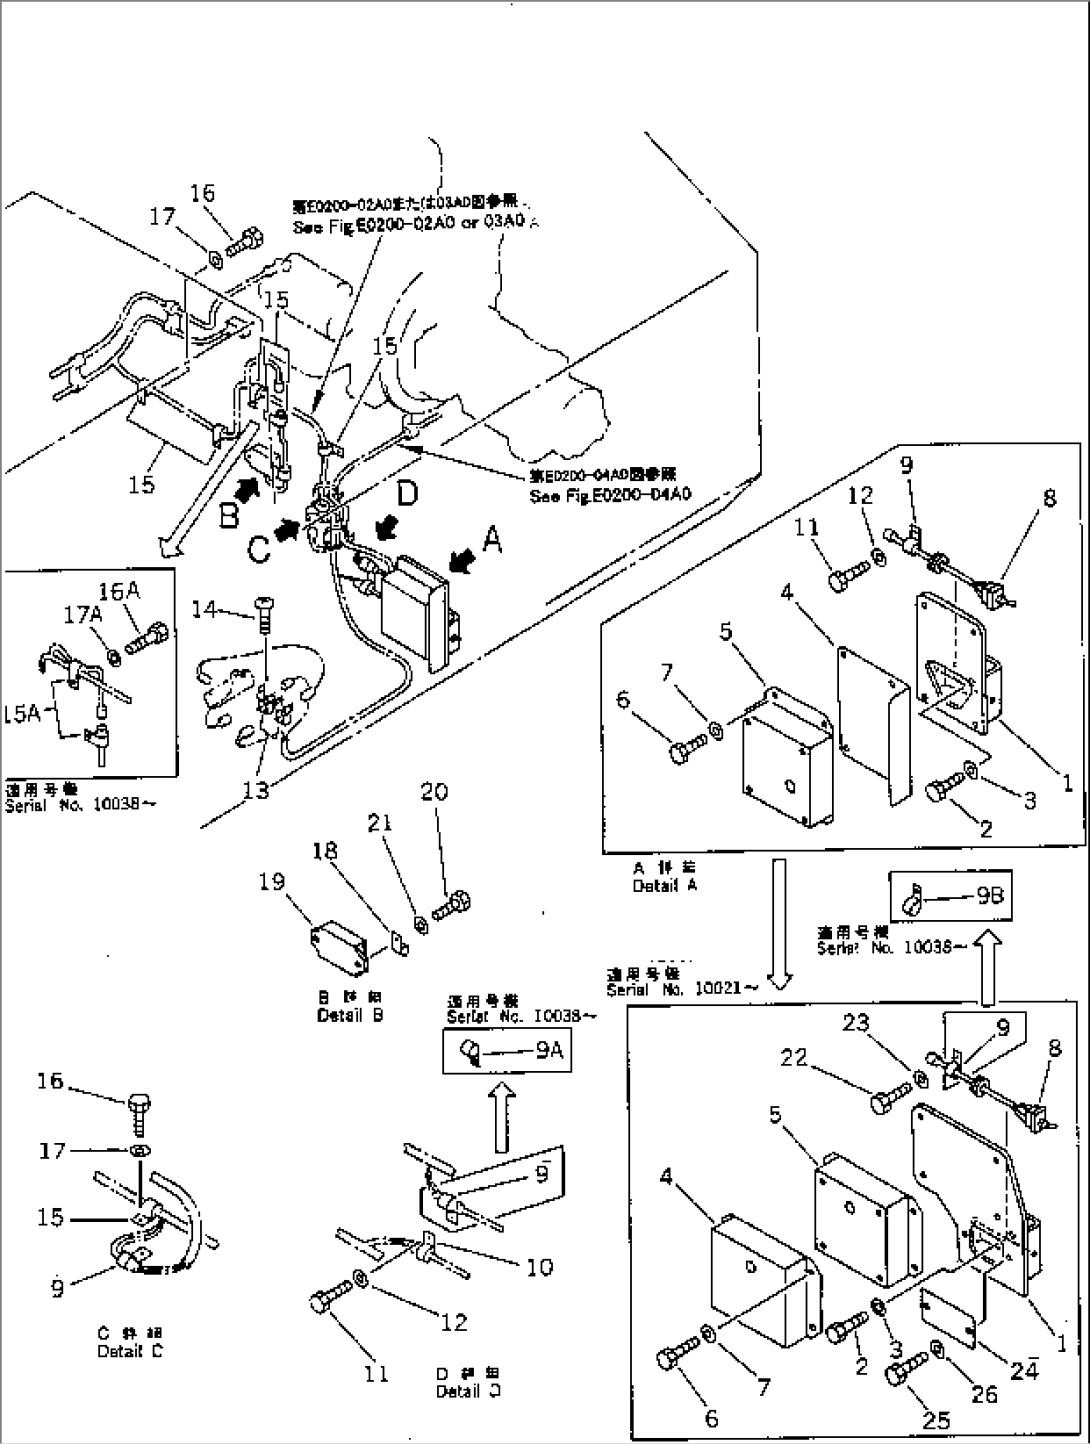 ELECTRICAL SYSTEM (WIRING)